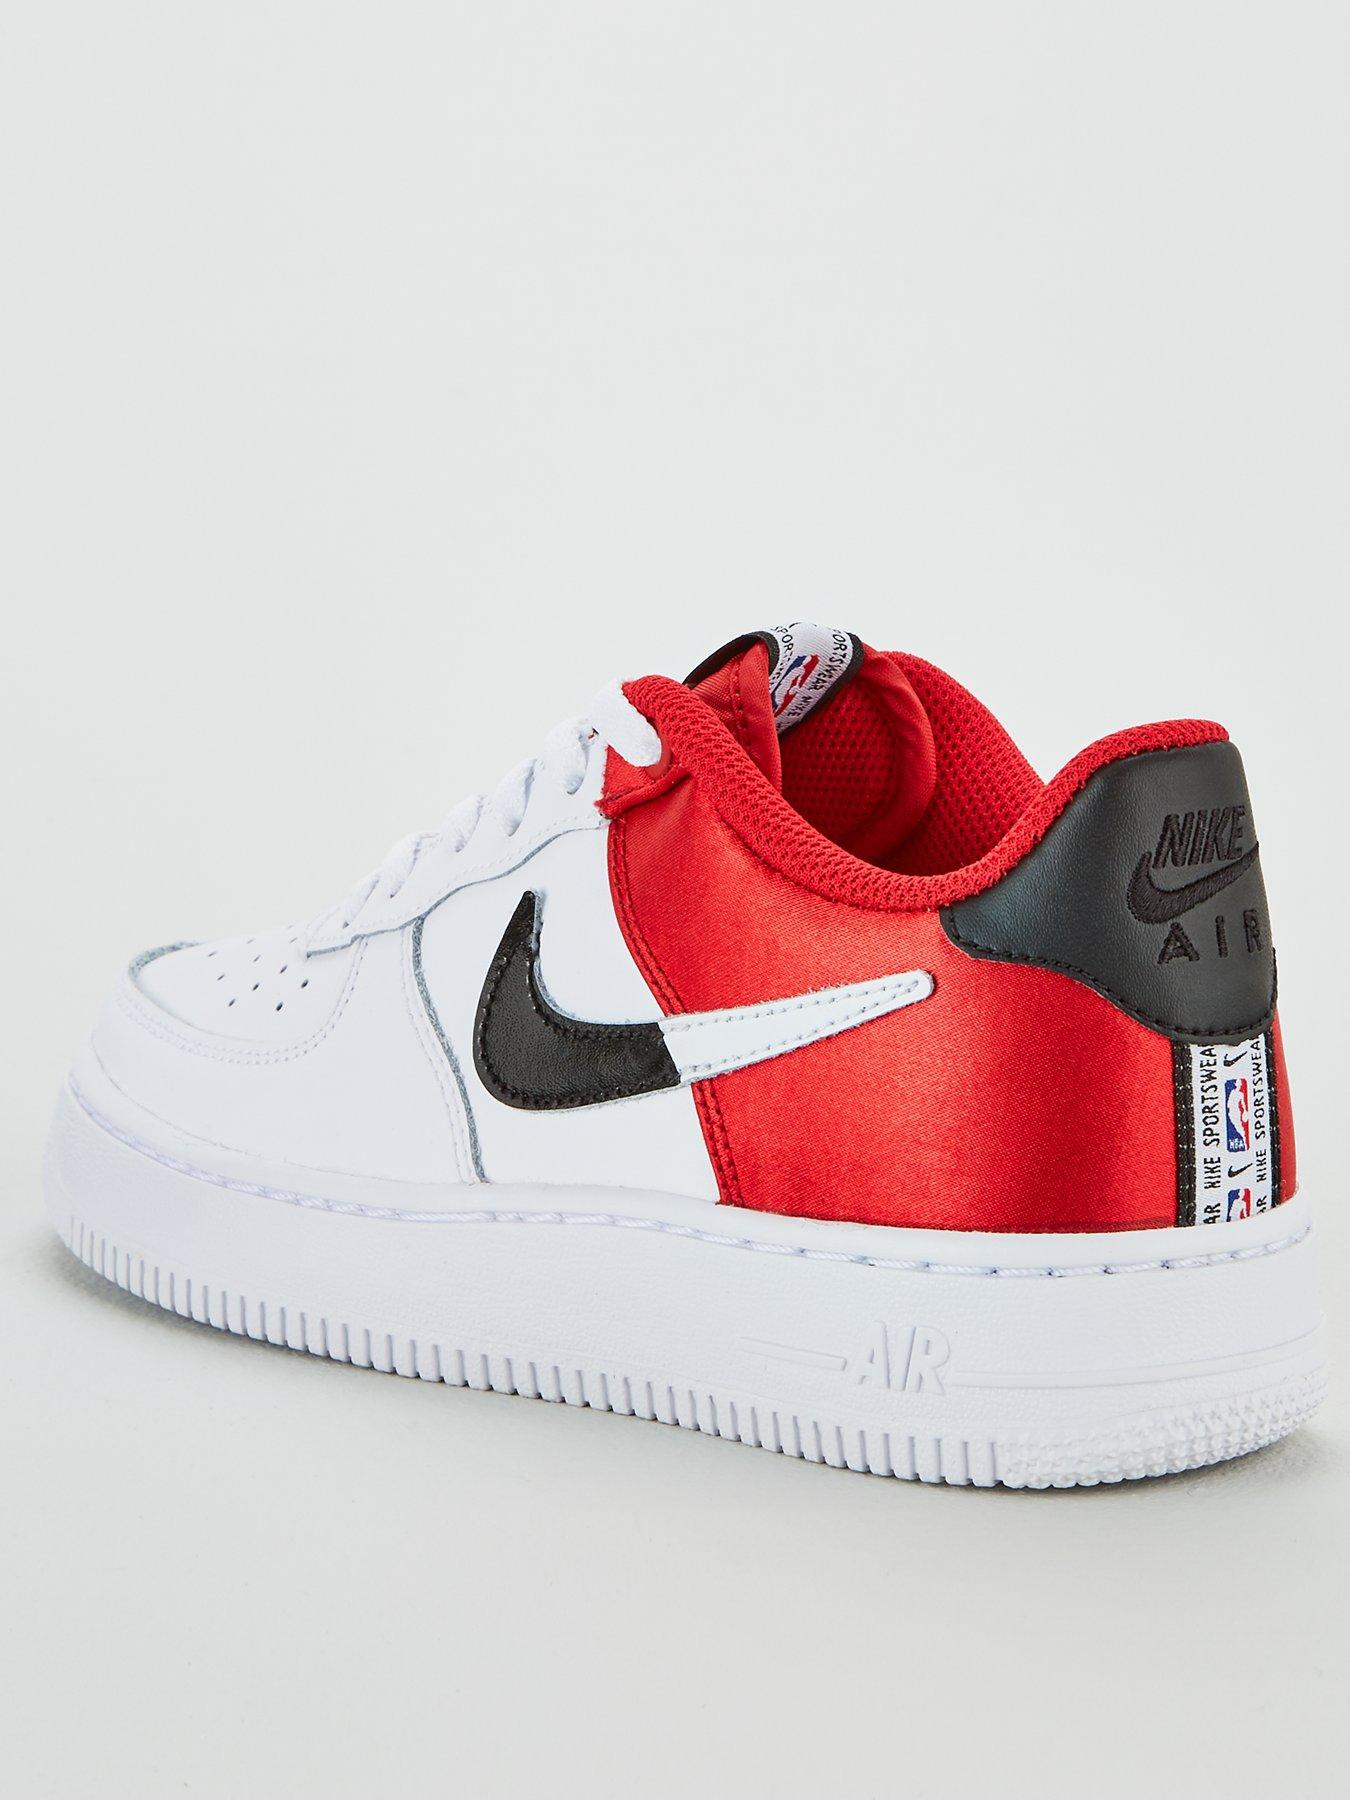 nike air force 1 junior white and red